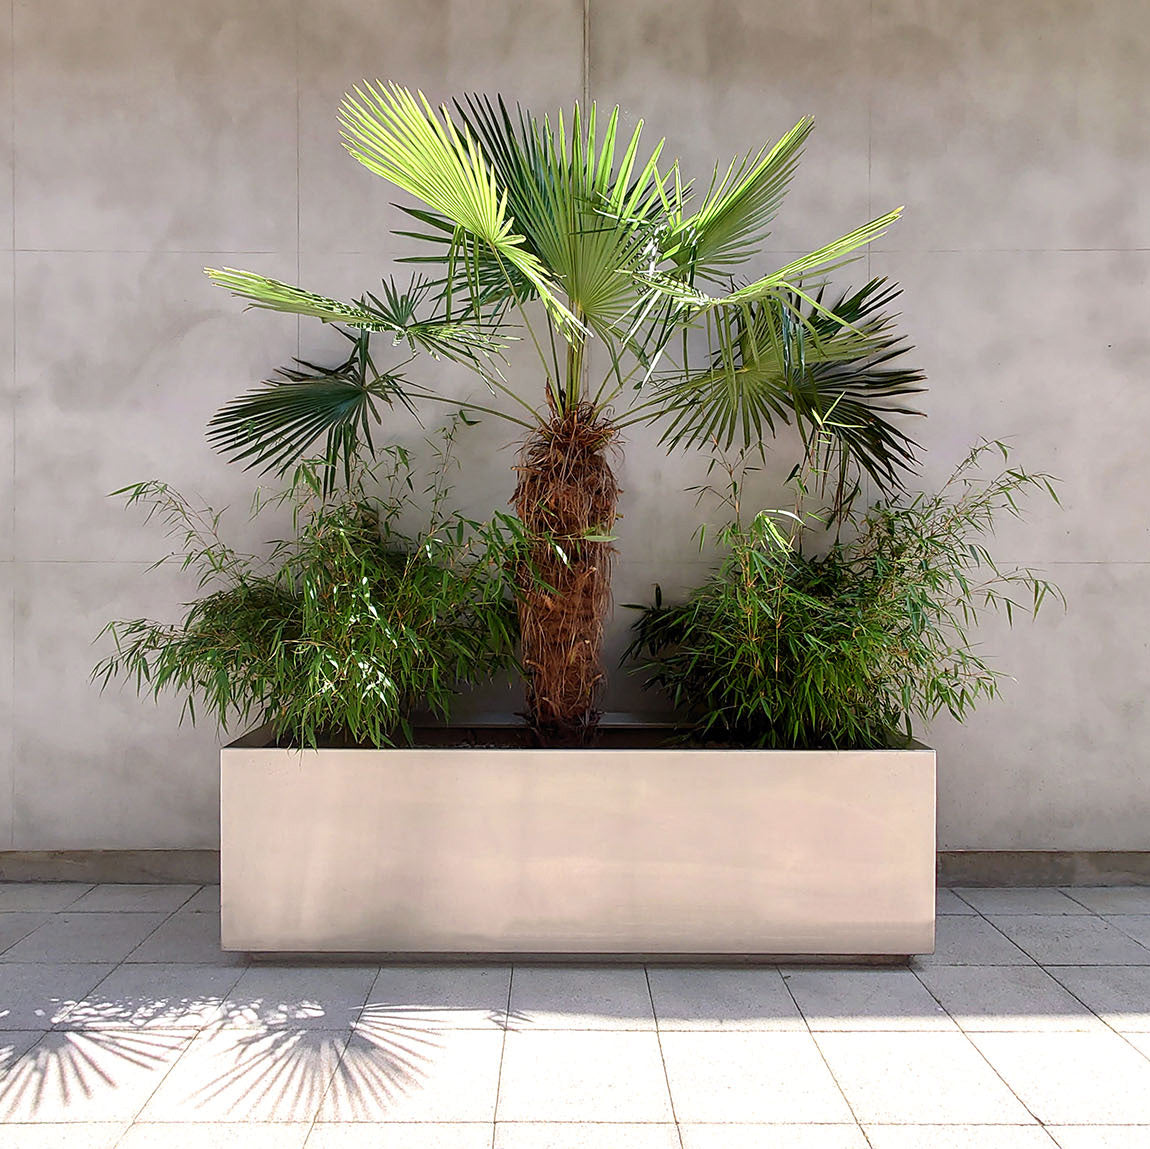 Bellamy Stainless Steel Planter Troughs from Indoor Outdoors